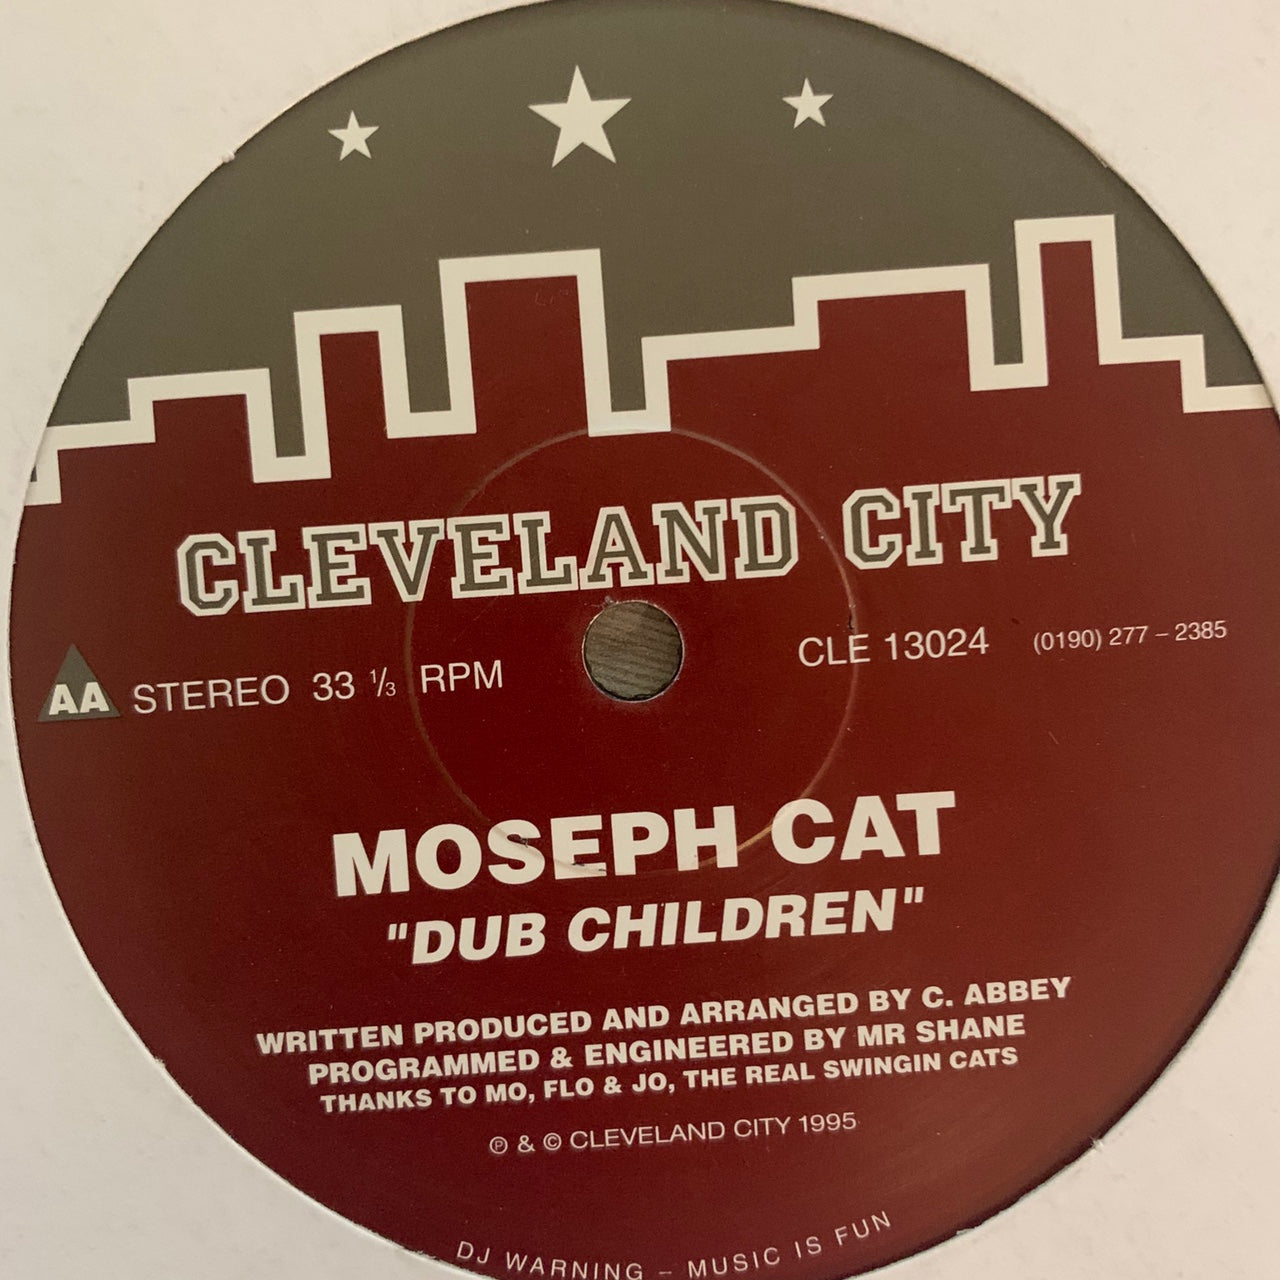 Moseph Cat “My Children” on the iconic House Music Label Cleveland City 2 Track 12inch Vinyl